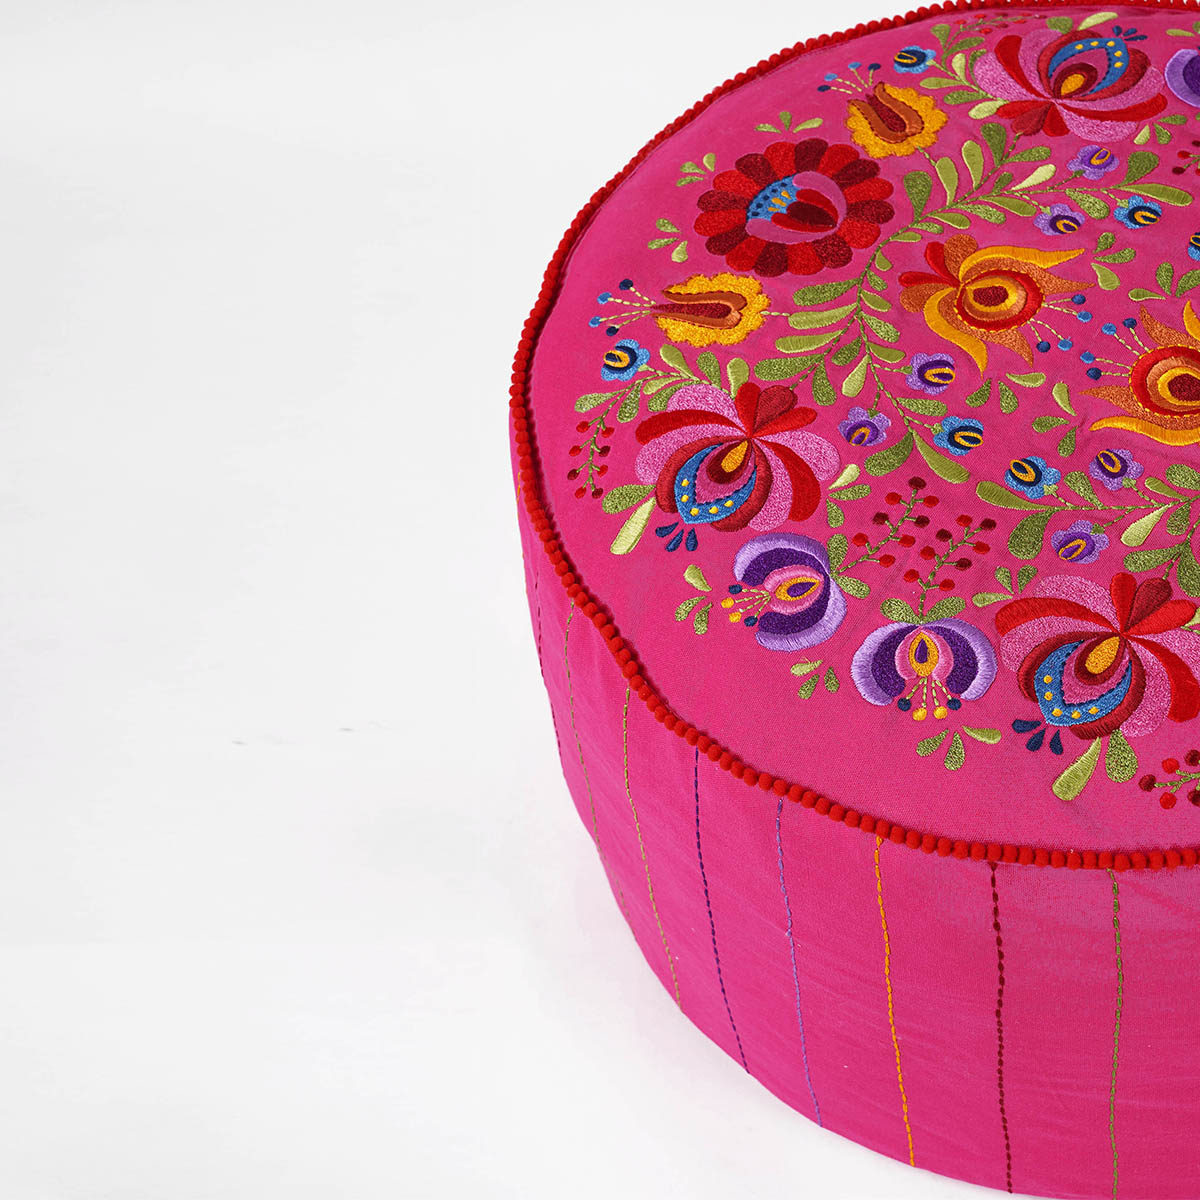 Matyo - Embroidered boho pouf cover, Hot pink with multicolour rose embroidery ottoman cover